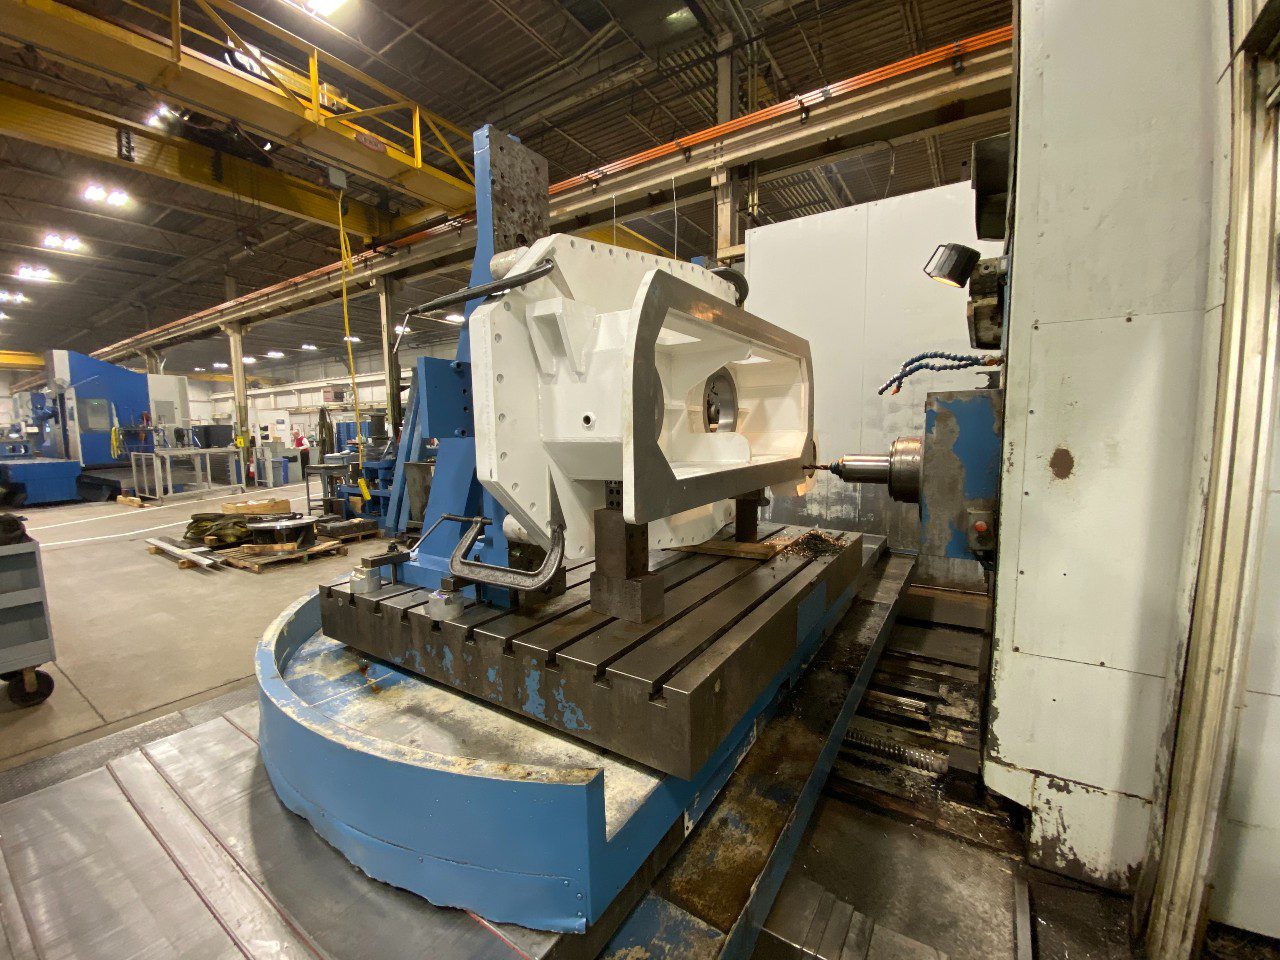 2001 5" Union CNC Horizontal Boring Mill Model TC 130 (Installed new in 2001)